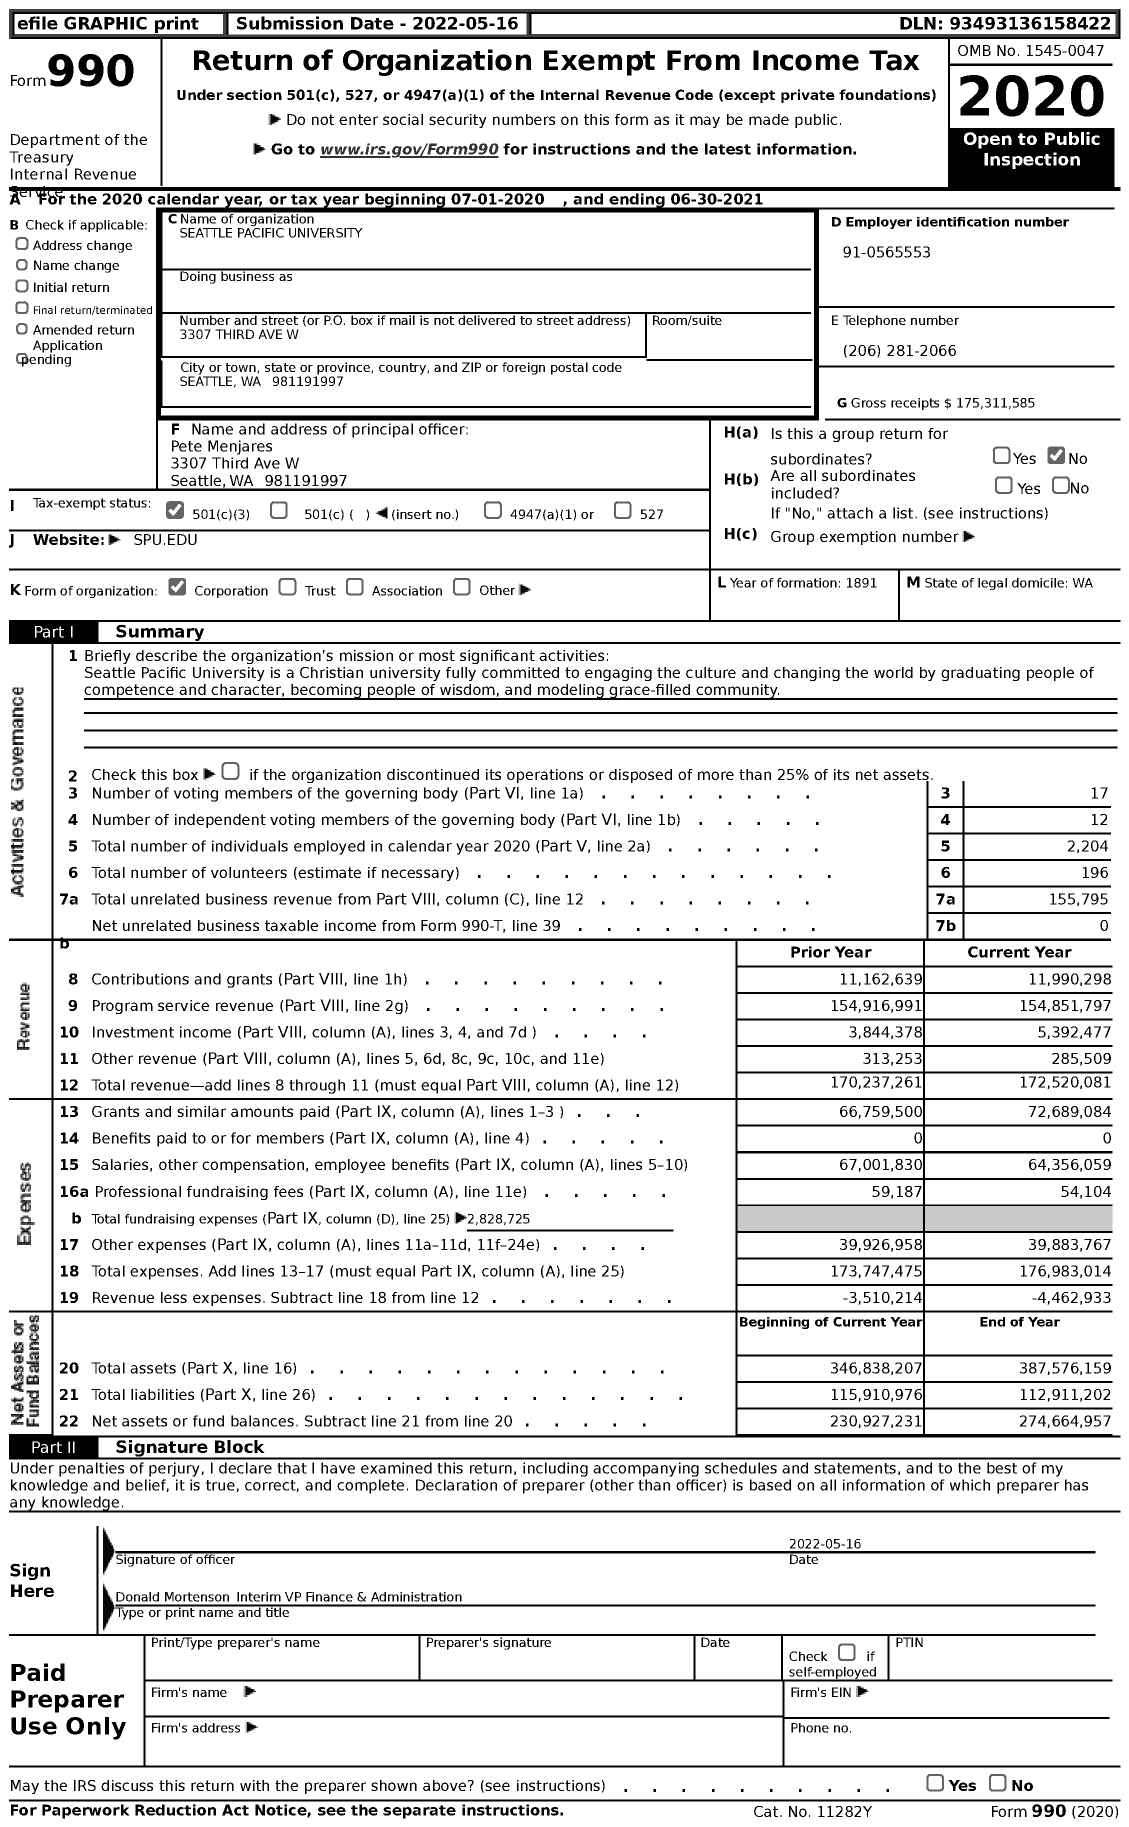 Image of first page of 2020 Form 990 for Seattle Pacific University (SPU)